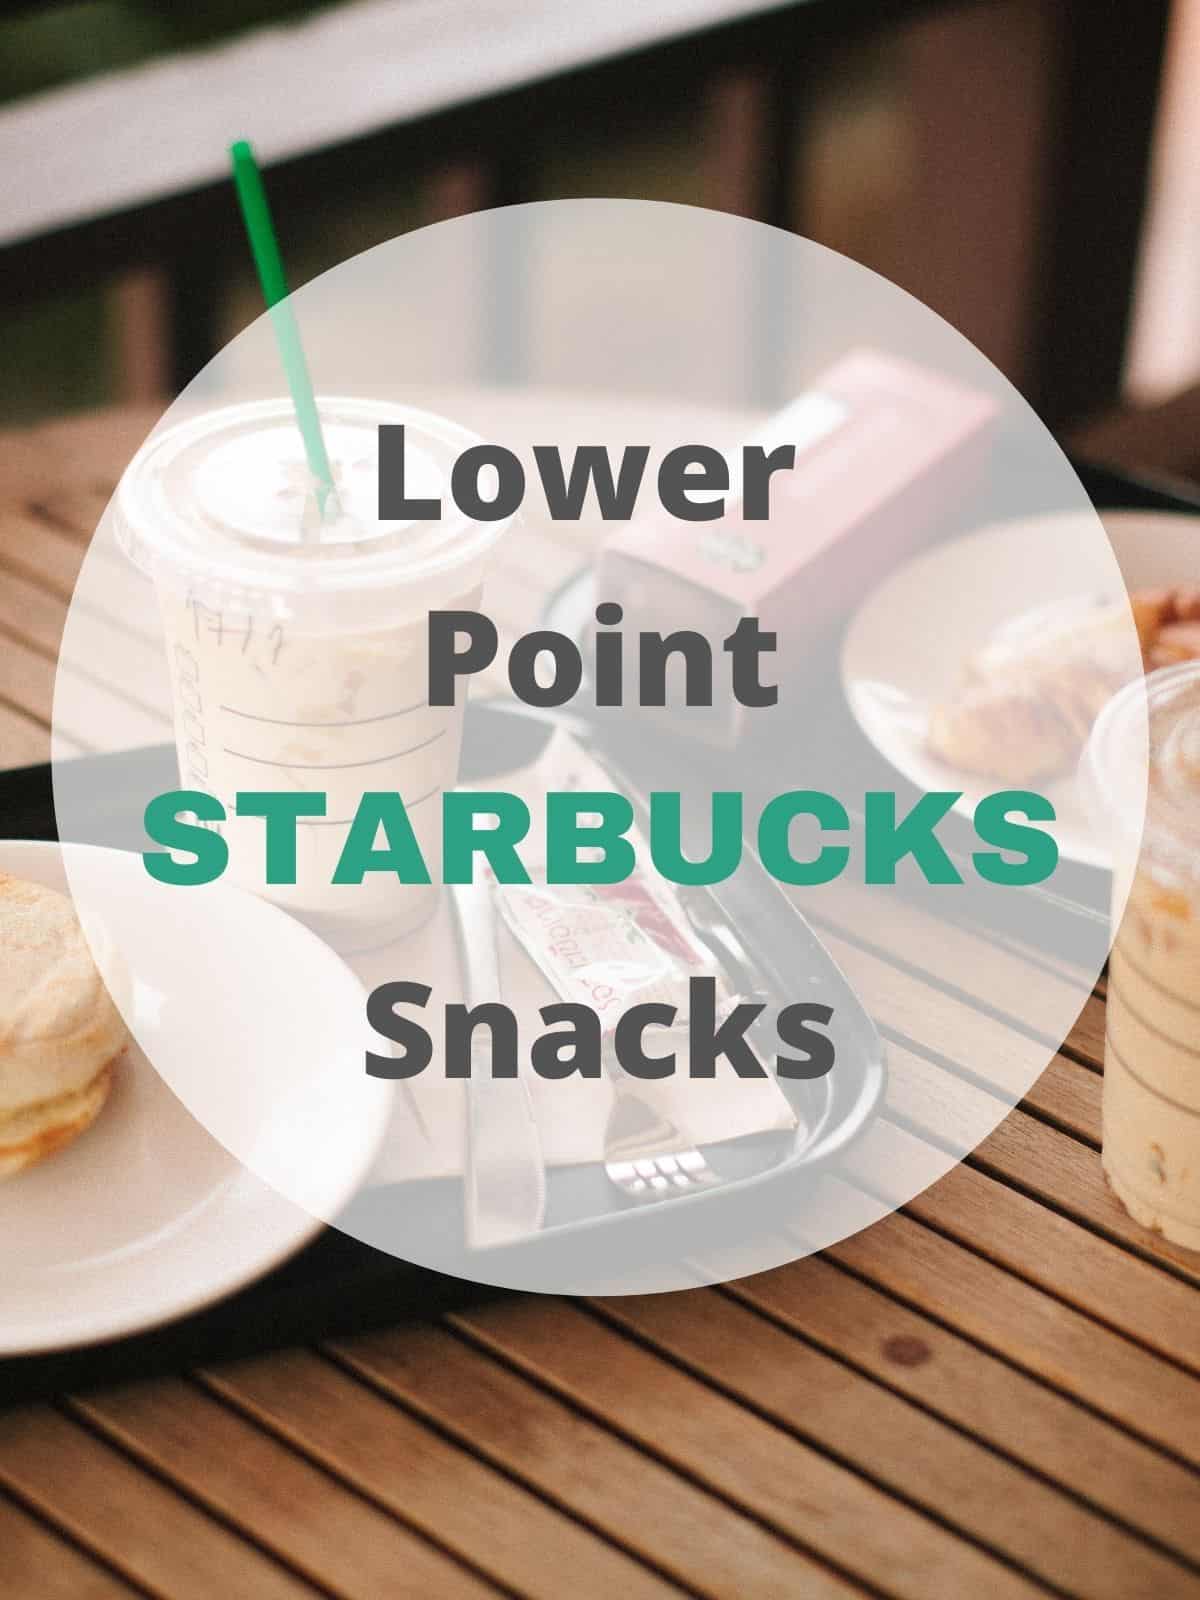 A table of starbucks drinks and snacks with text overlay 'Lower Point Starbucks snacks'.